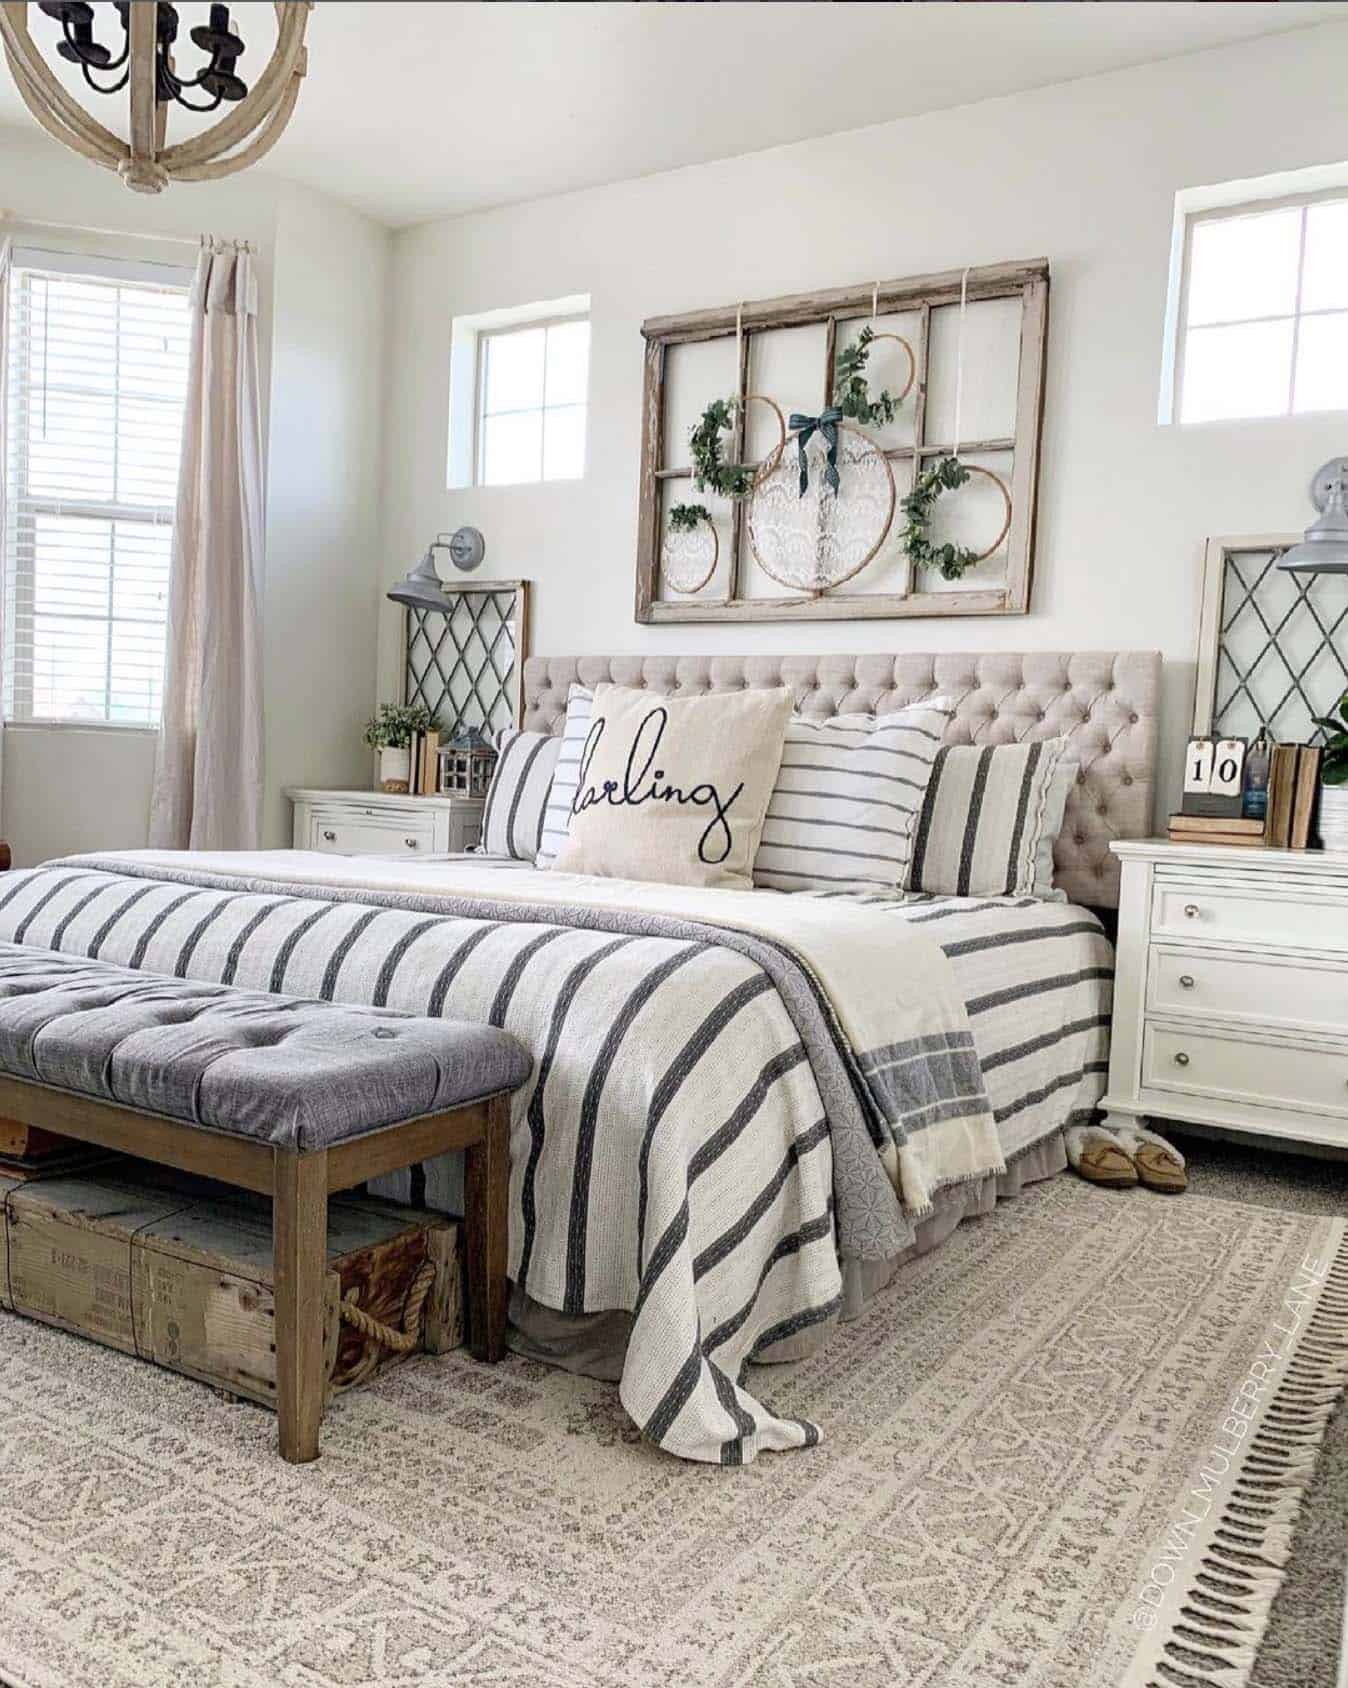 Dreamy country house style bedroom